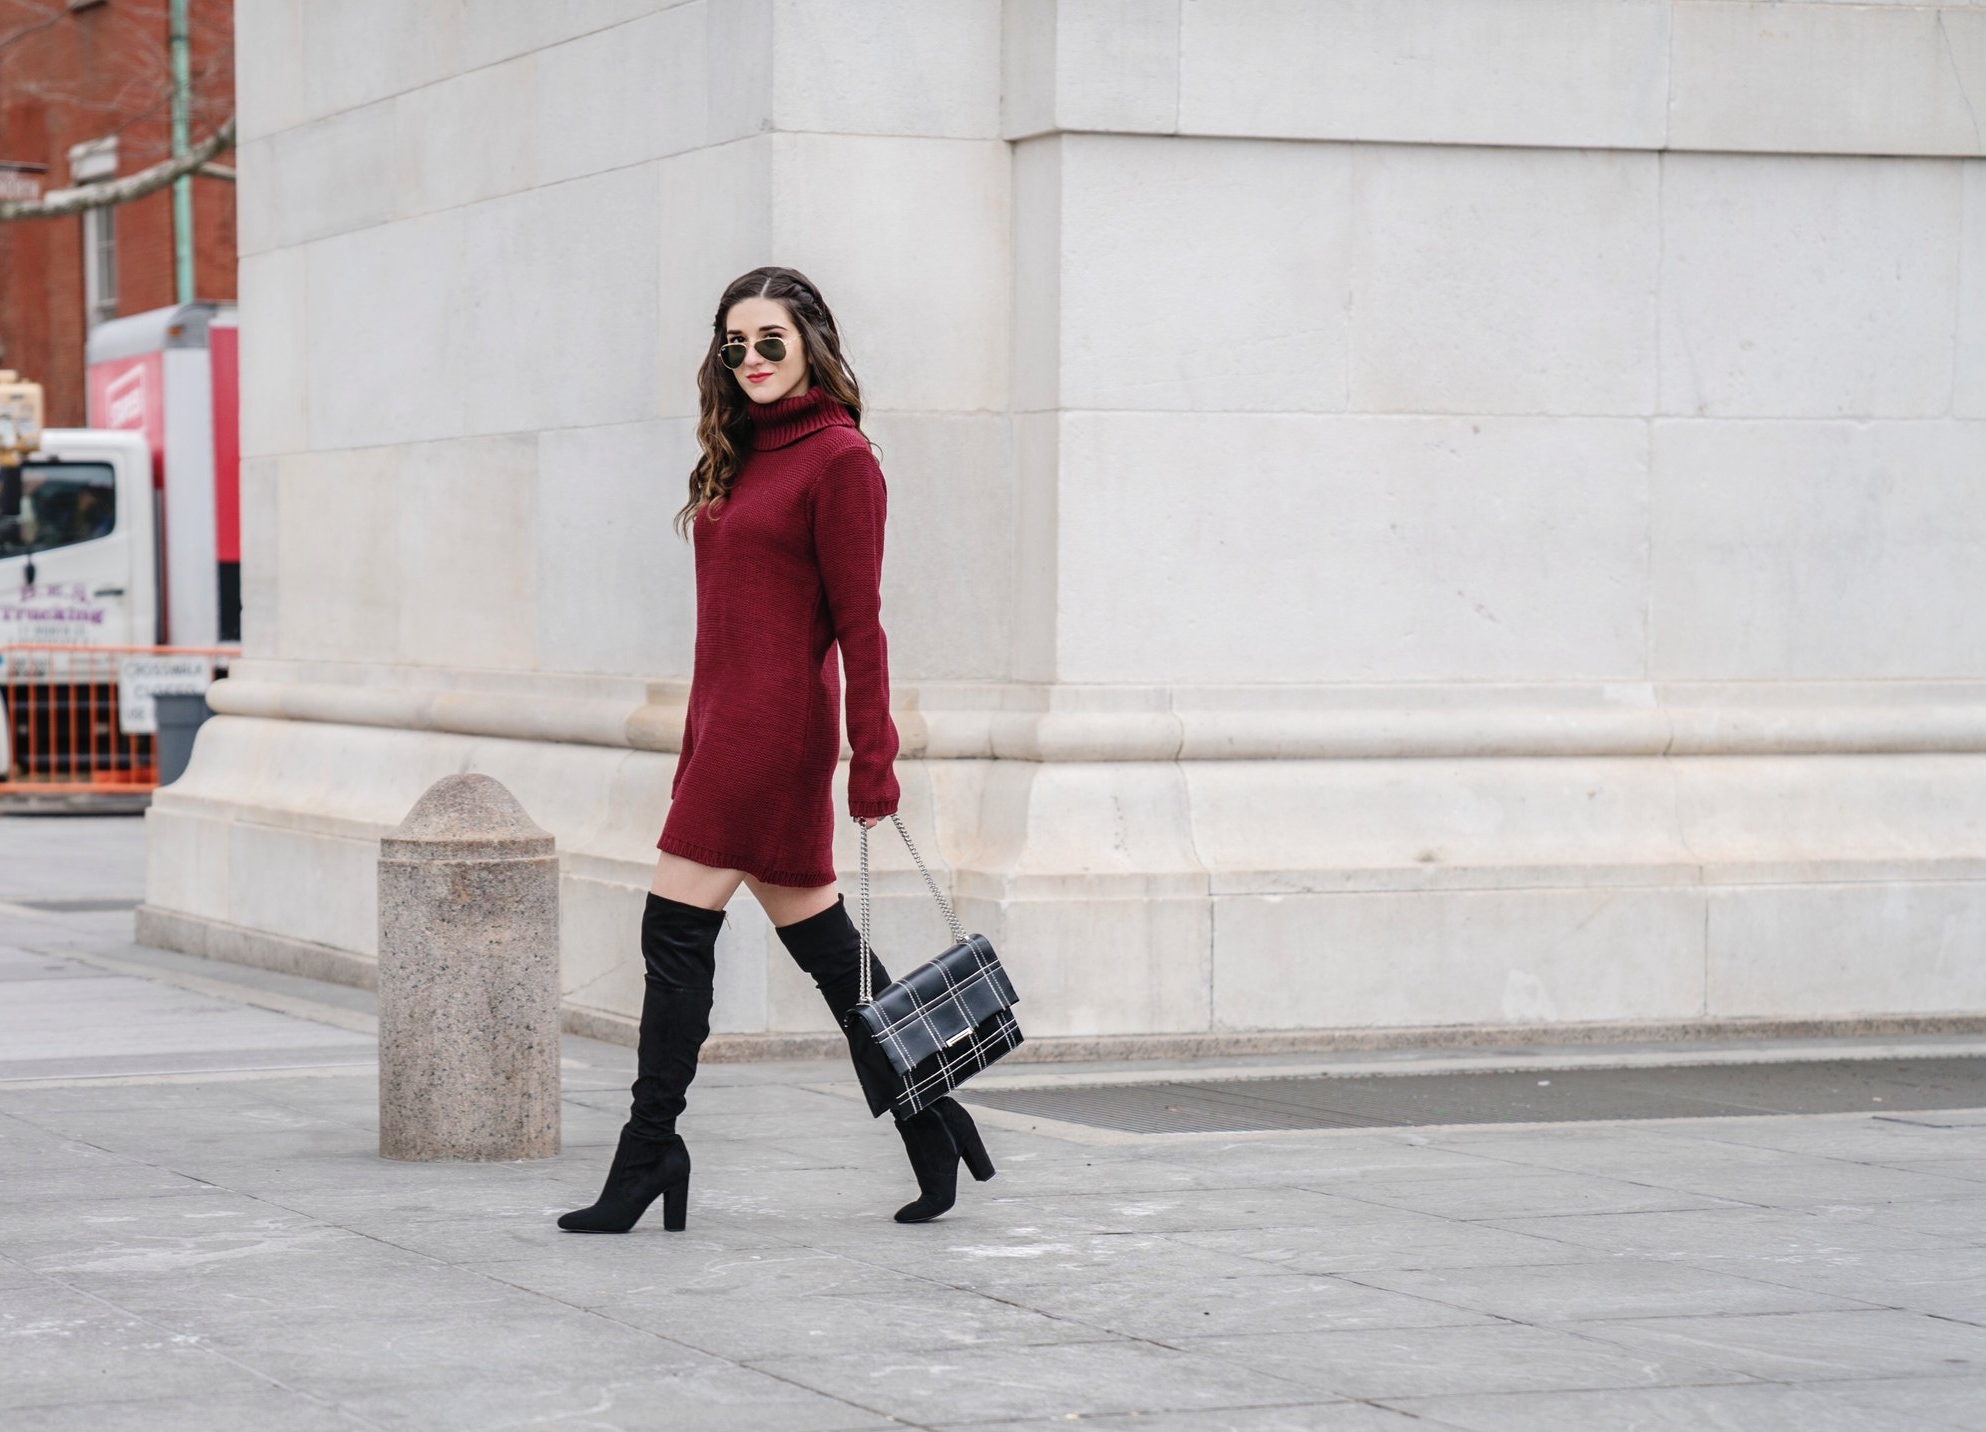 Maroon Sweater Dress OTK Boots My Biggest Blogging Mistake Esther Santer Fashion Blog NYC Street Style Blogger Outfit OOTD Trendy Red Girl Women Sunglasses RayBan Aviators Shopping Wearing Zara Casual Bag Grid Purse Photoshoot New York City Inspo Hair.JPG